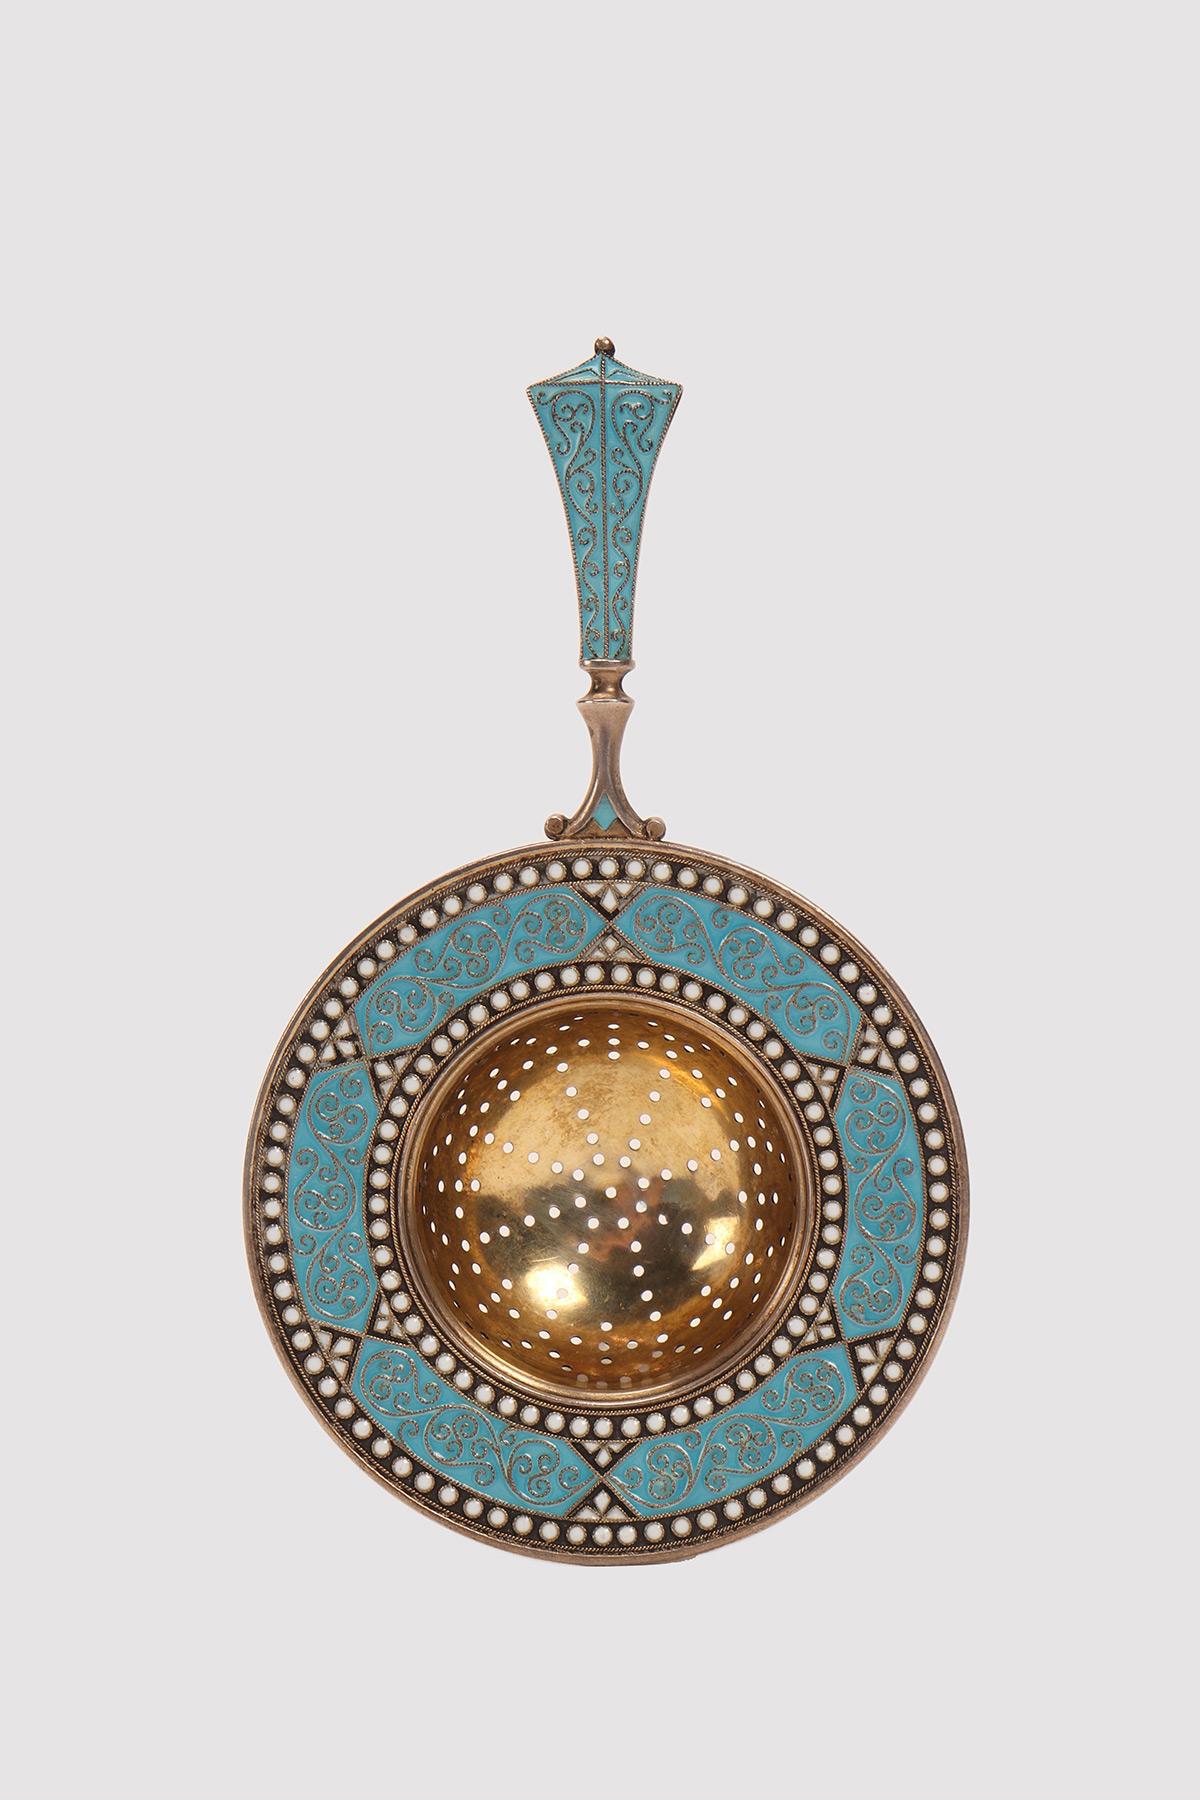 Tea strainer with handle, in gilt silver and geometrical decoration, with blue and white cloisonne enamels. Work of the famous silversmith David Andersen, house founded in 1876. Christiana, Denmark circa 1900.